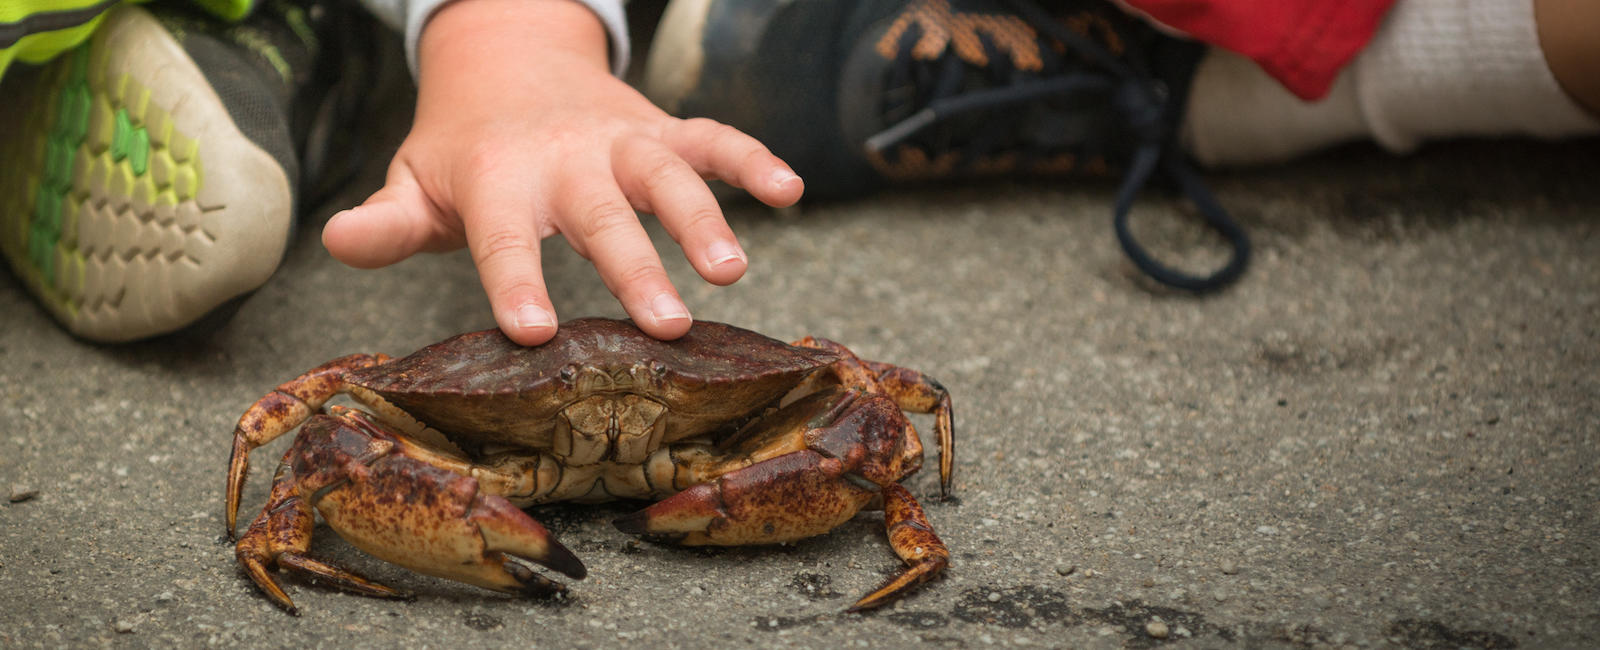 Dungeness crab 